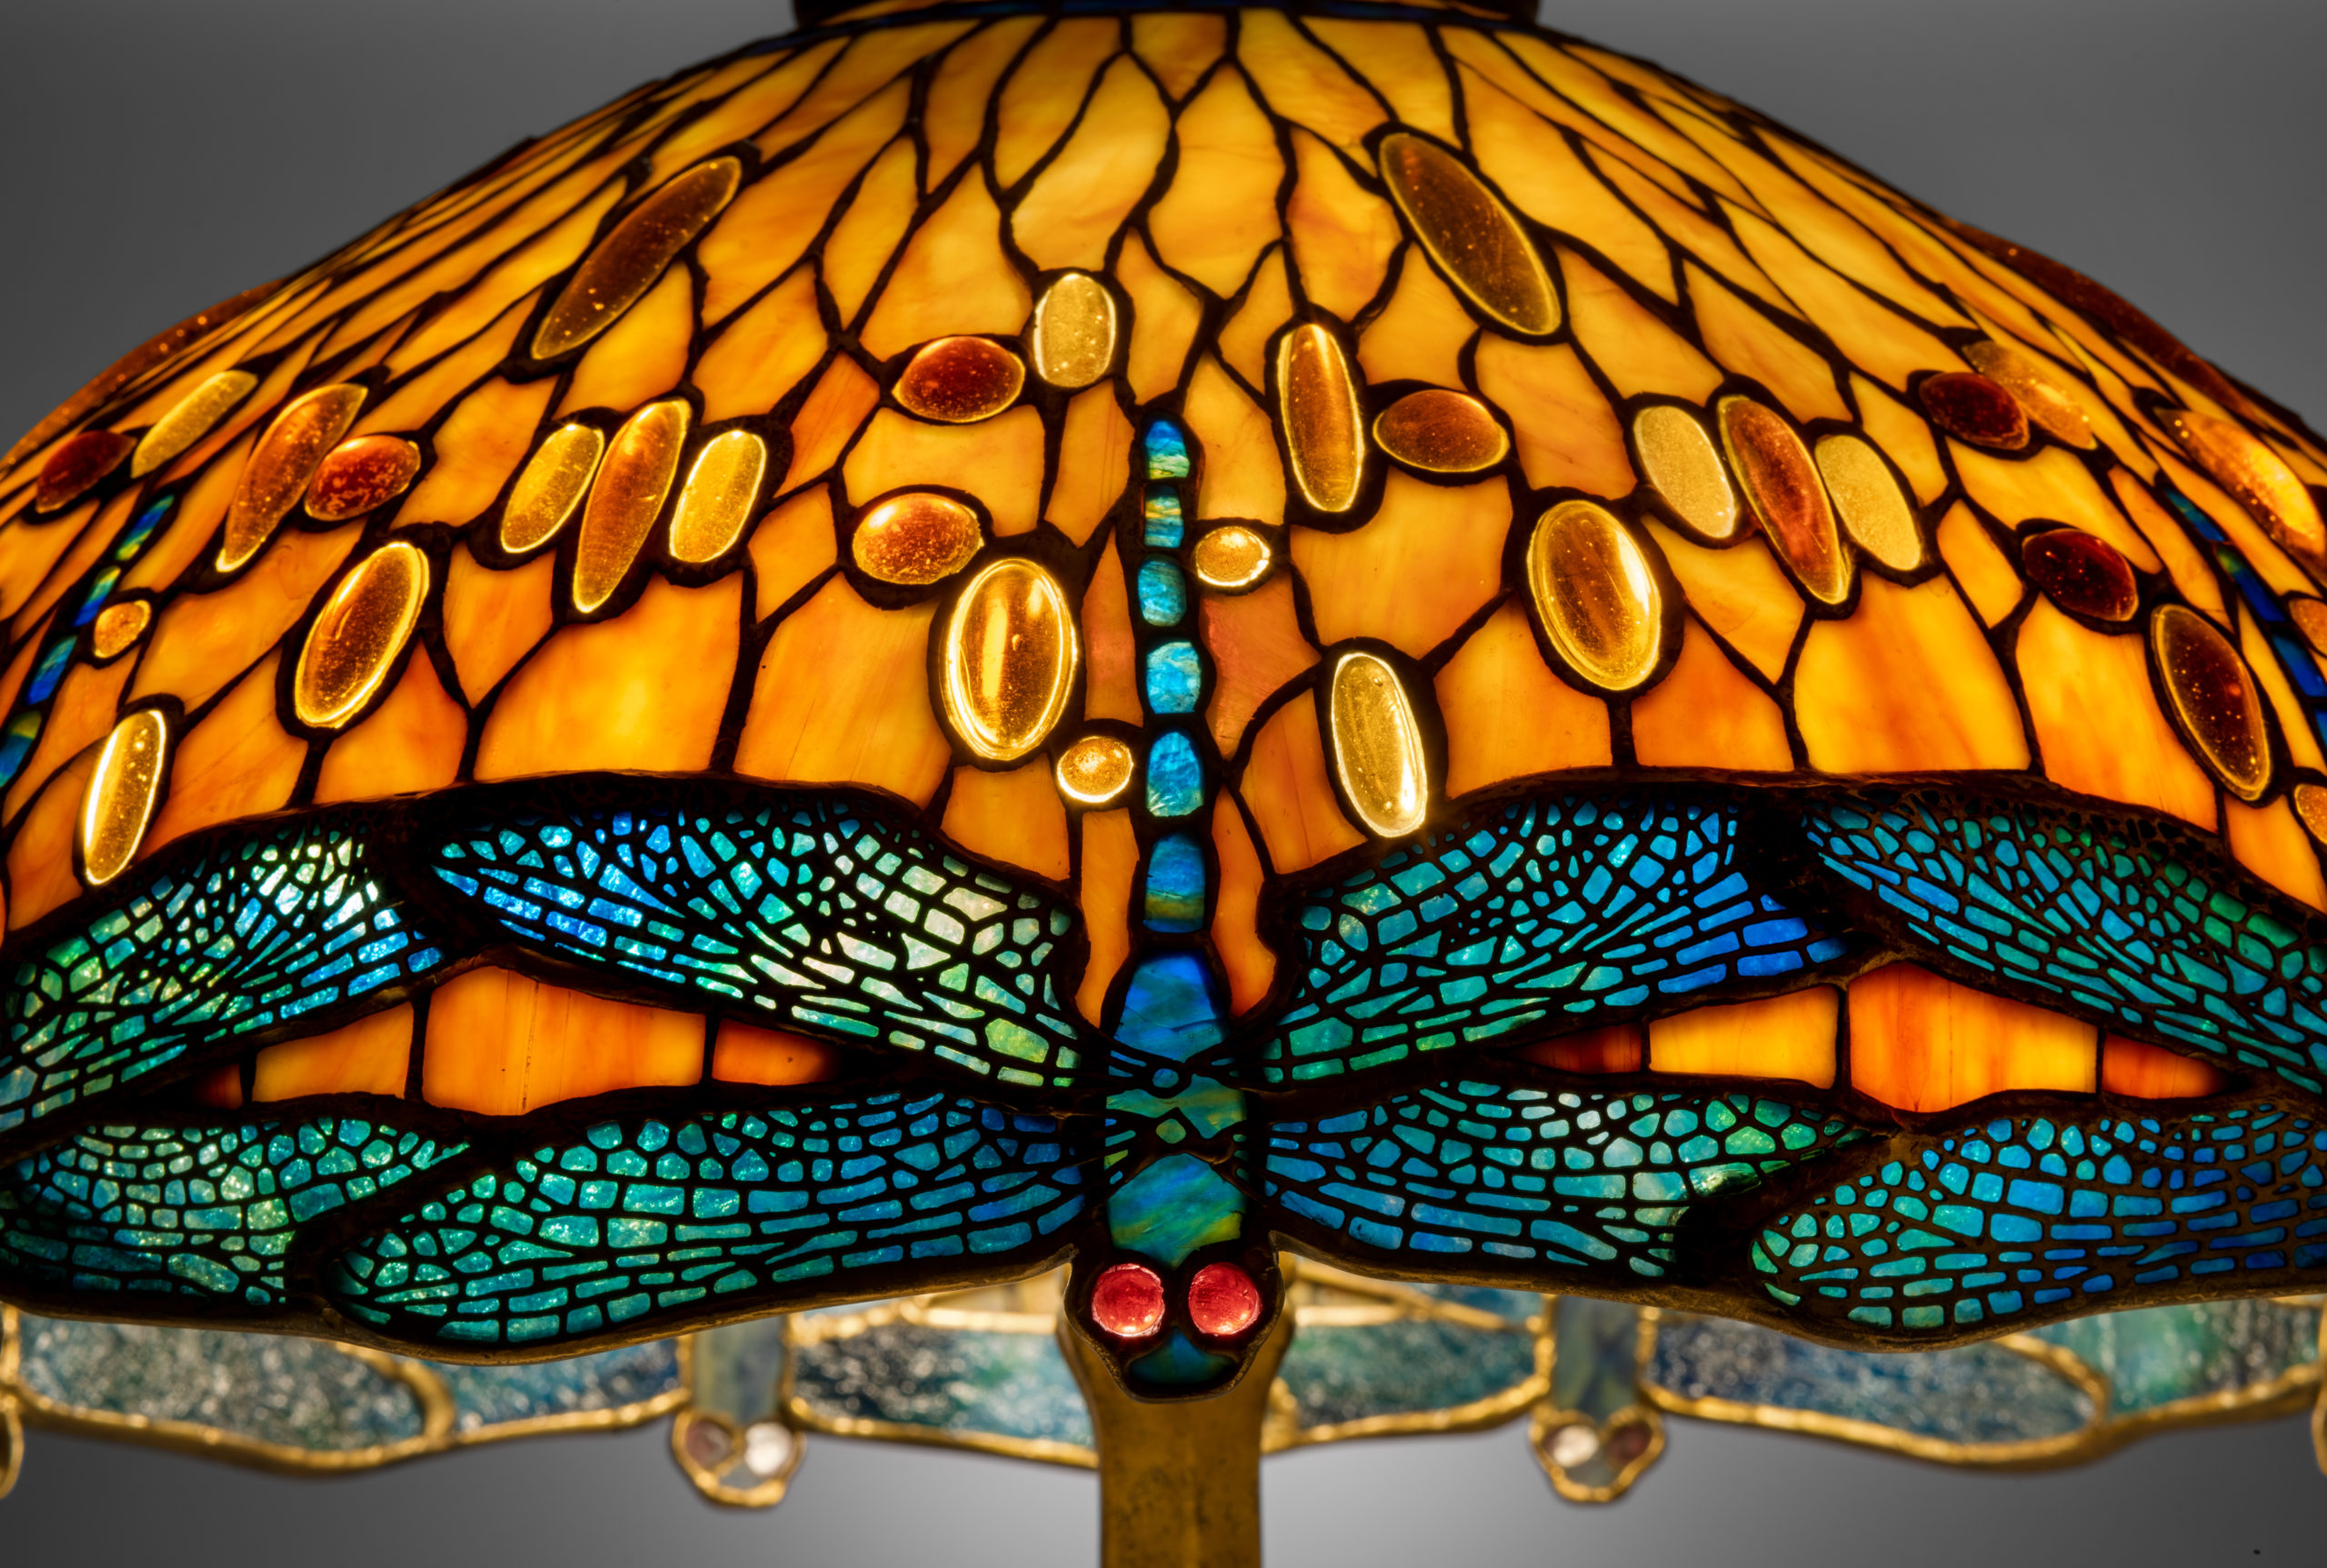 A close up view of an orange, glass, mosaic lampshade. The rim of the lampshade is made up of a repeated, upside down, blue dragonfly pattern. Some of the glass pieces have a jewel tone quality and are reflecting light.